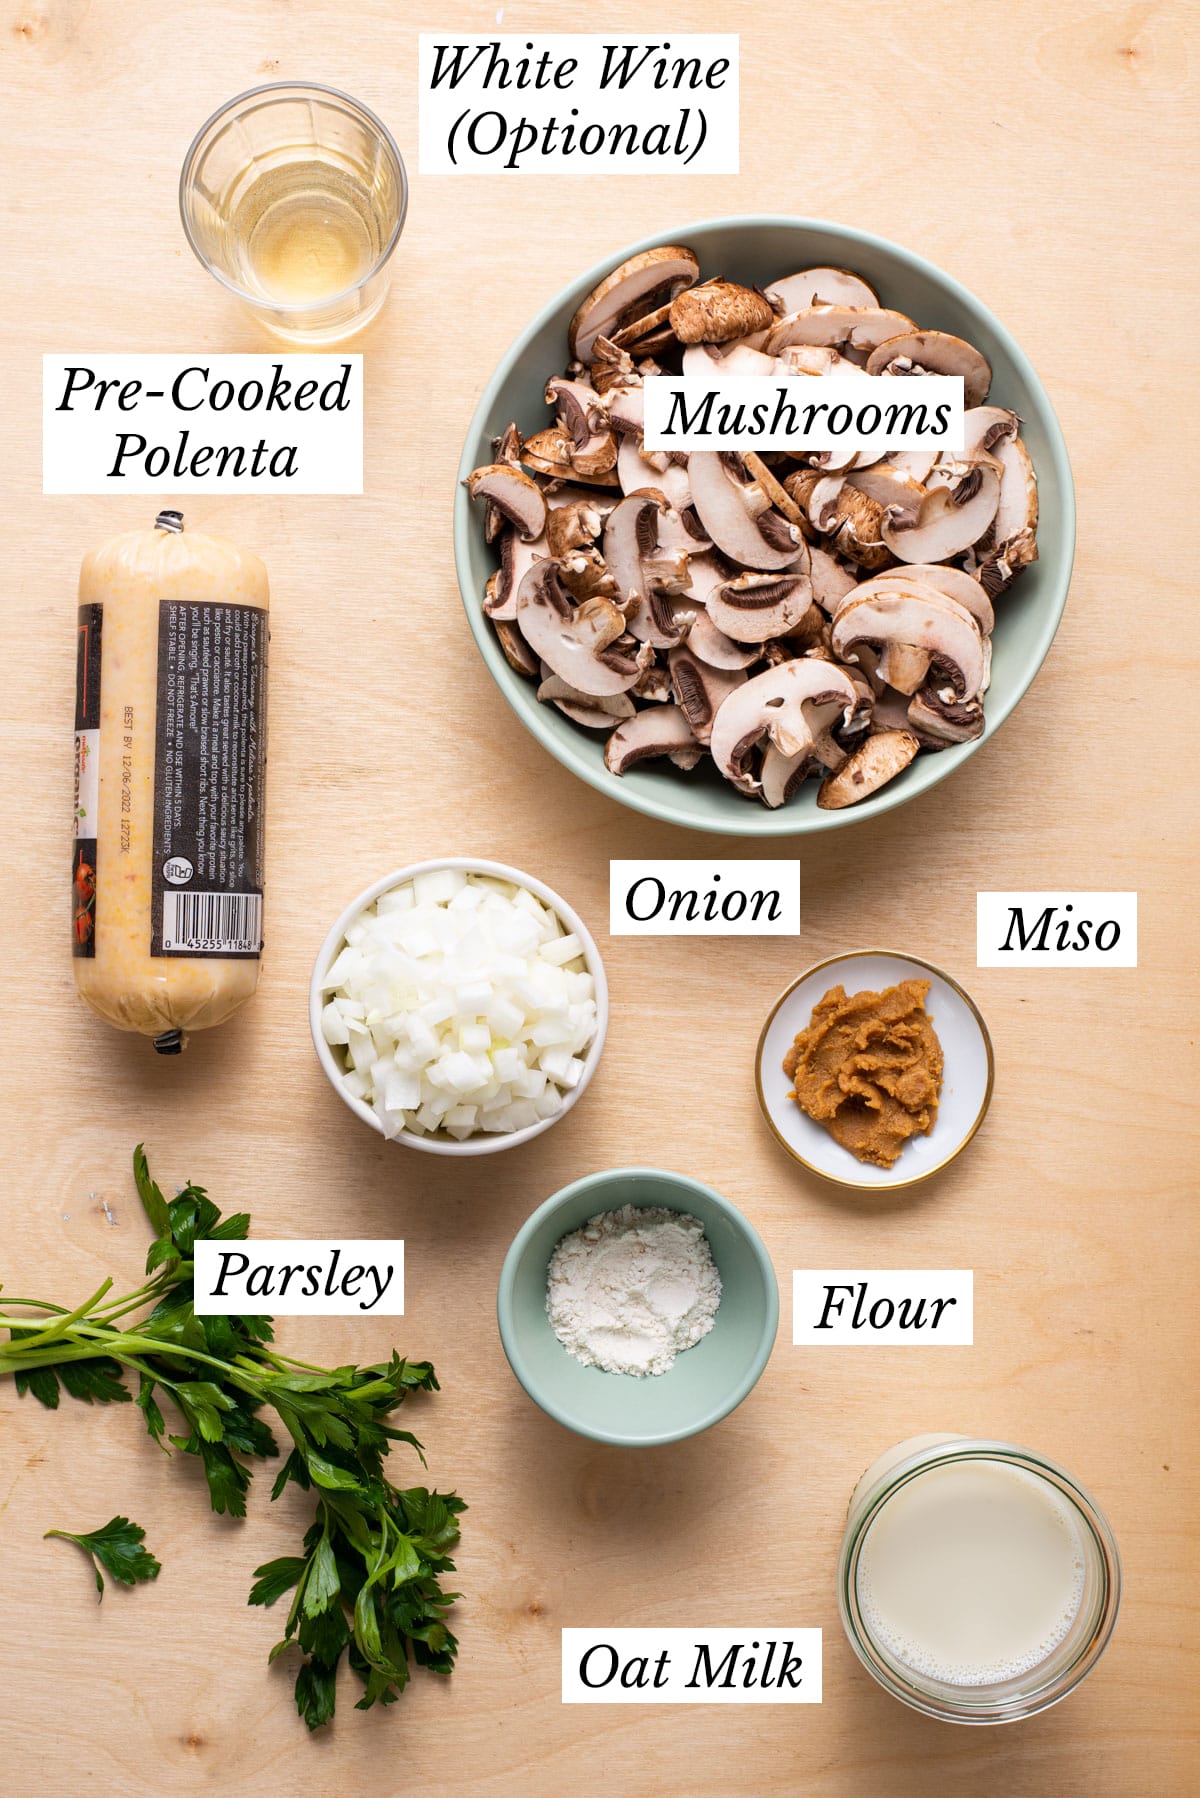 Ingredients gathered to make baked polenta rounds with creamy mushroom sauce.